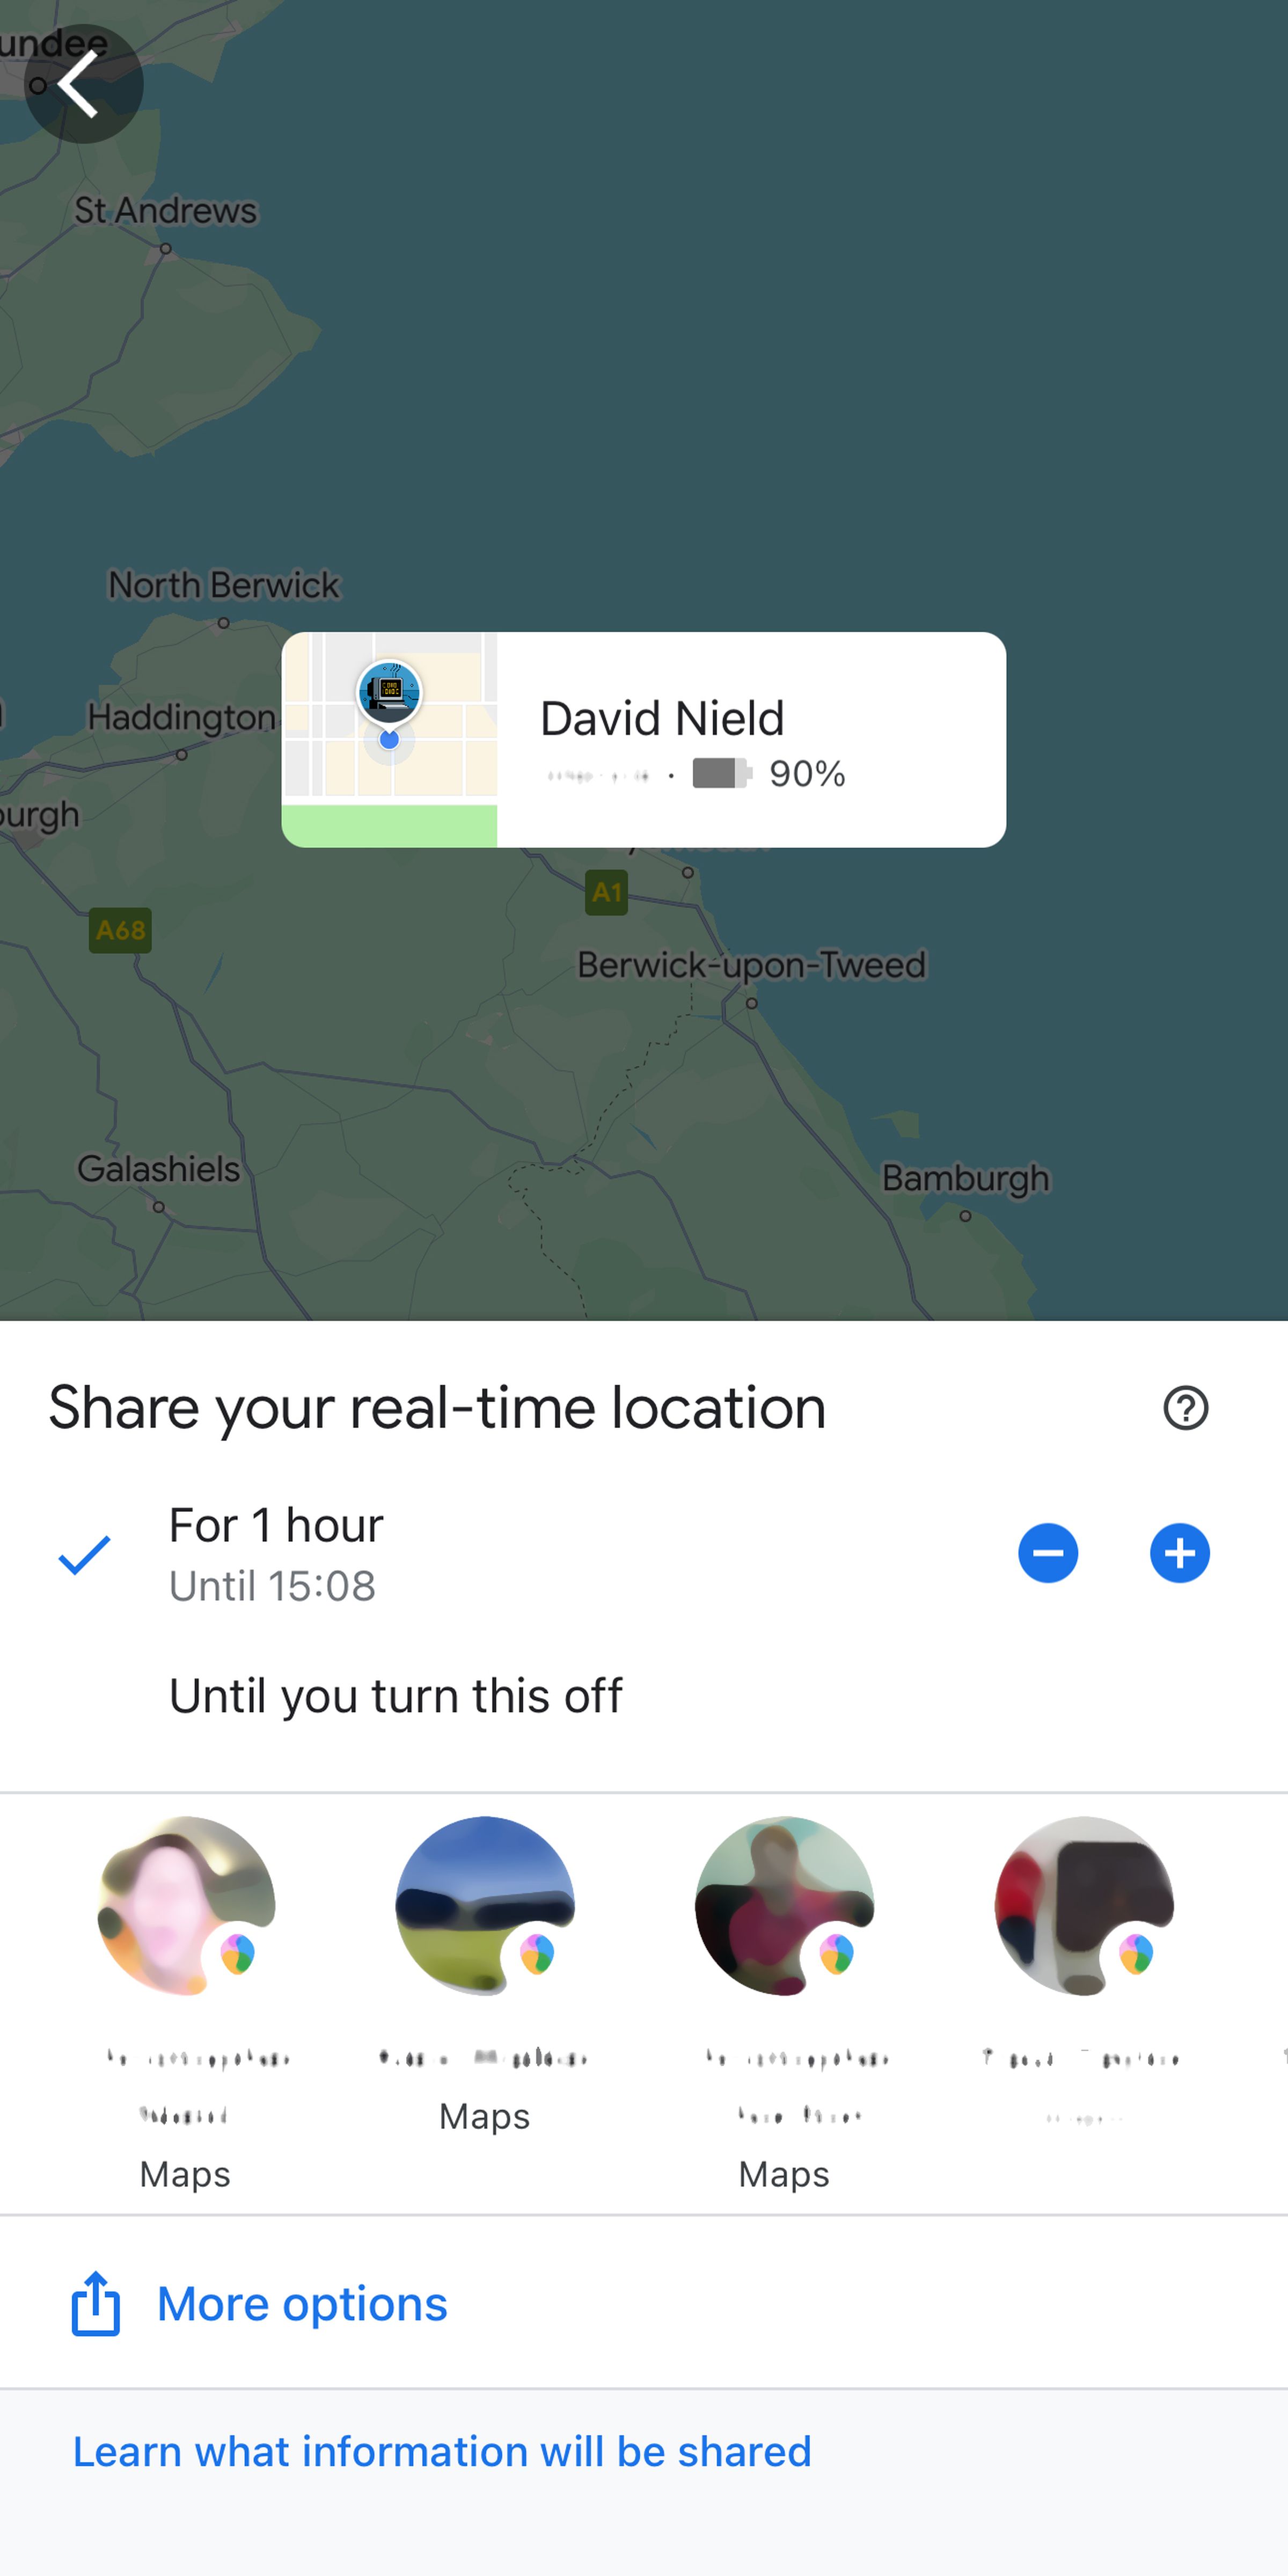 Mobile screen with label David Nield in center, and Share your real-time location at bottom pop-up with For 1 hour checked.